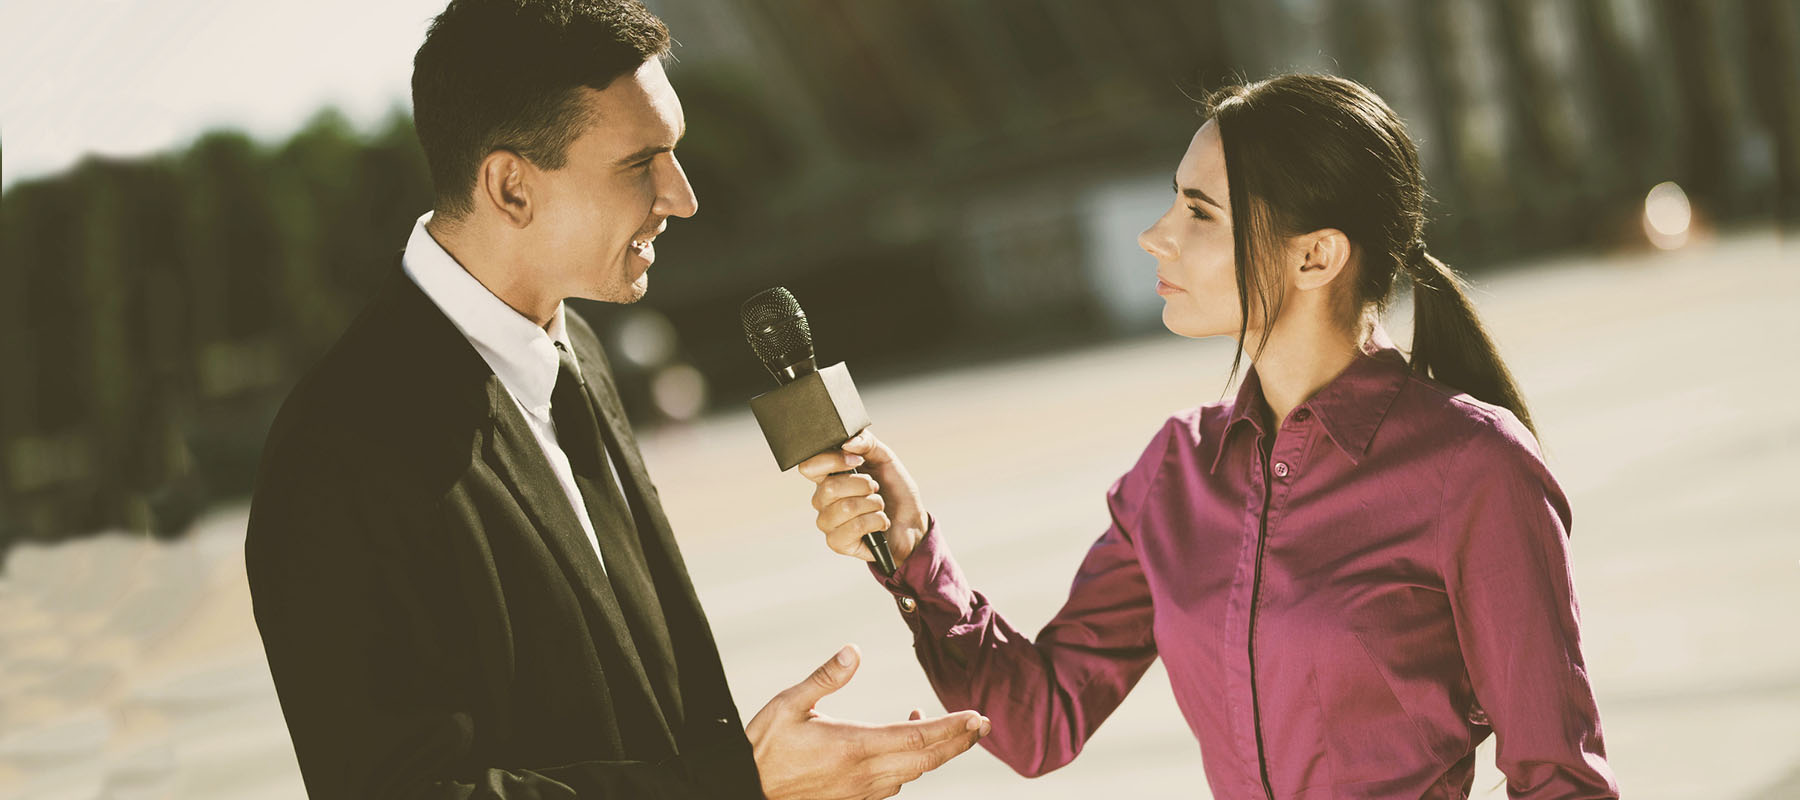 woman holds a microphone interviewing a man